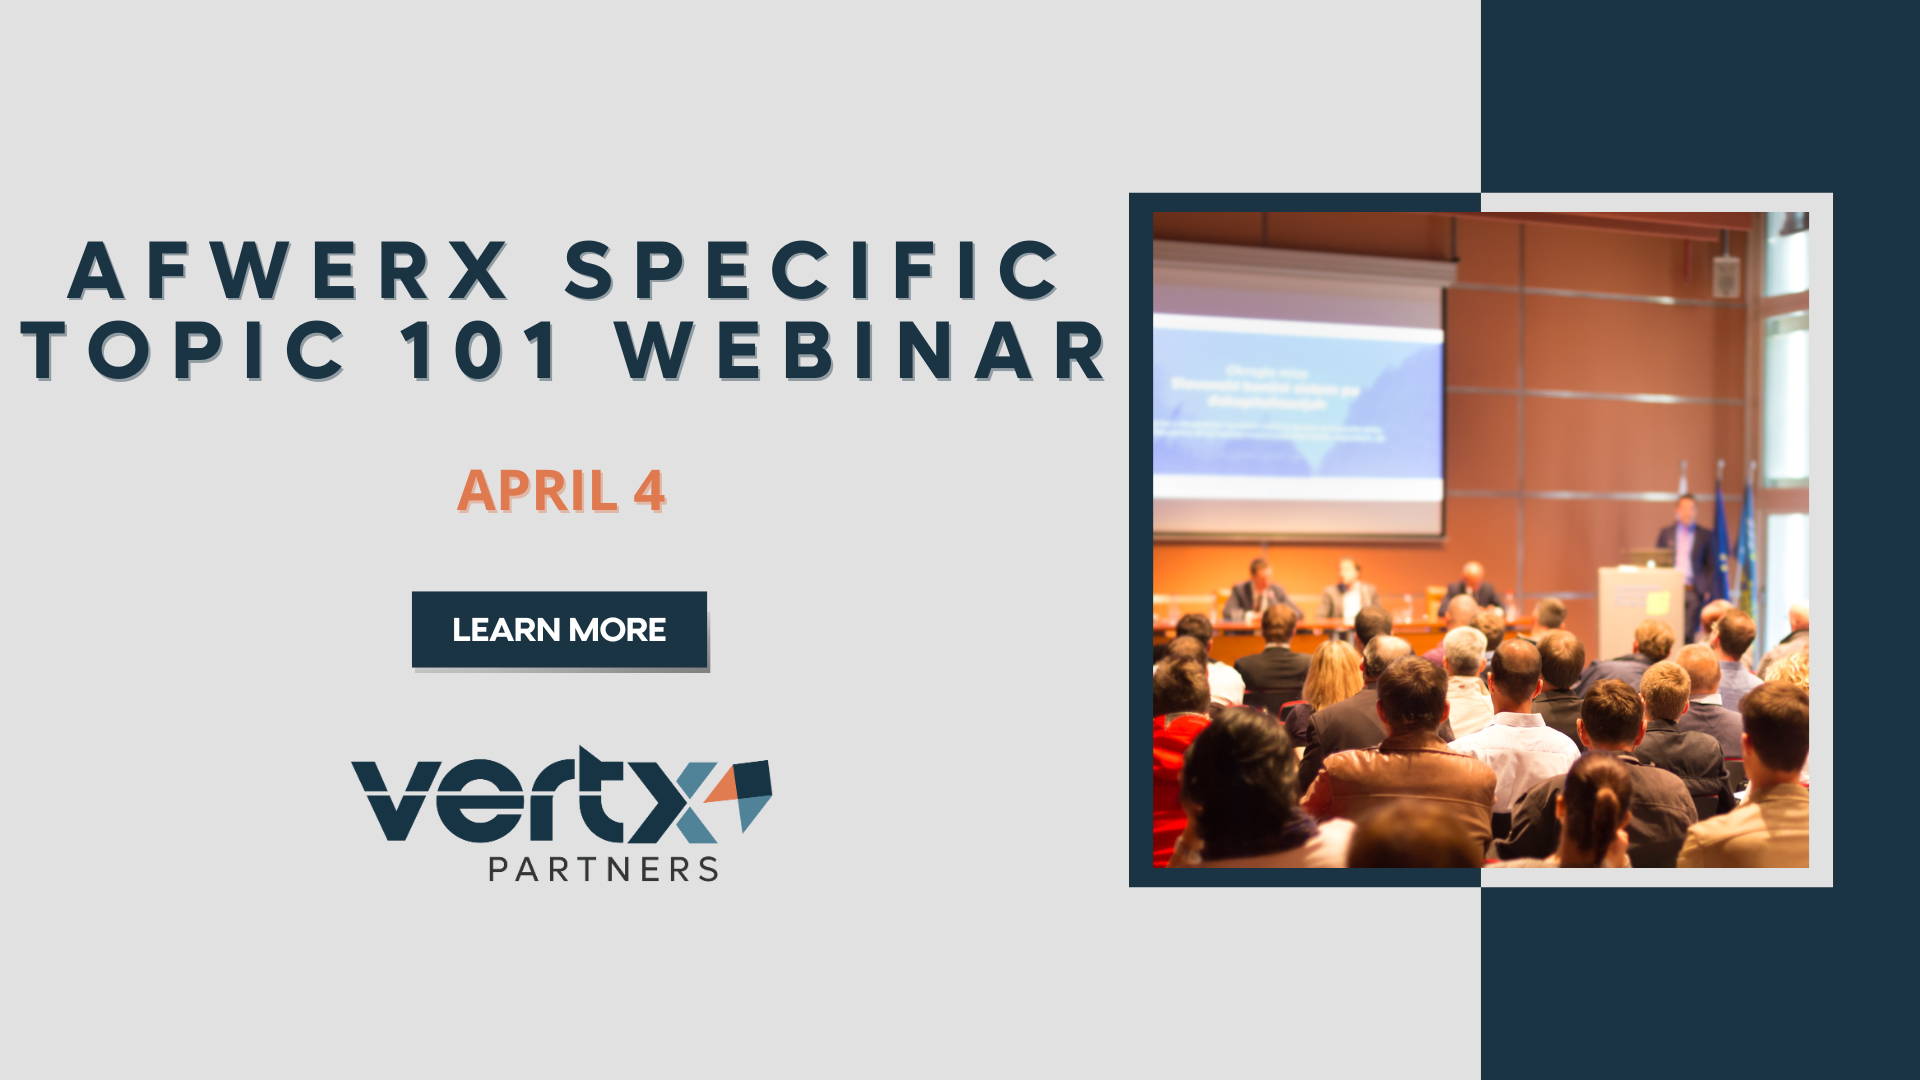 This event has the title "AFWERX Specific Topic 101 Webinar" with the date april 4th below it and a photo of a conference room with people sitting in it looking at a presentation to the right of the date.